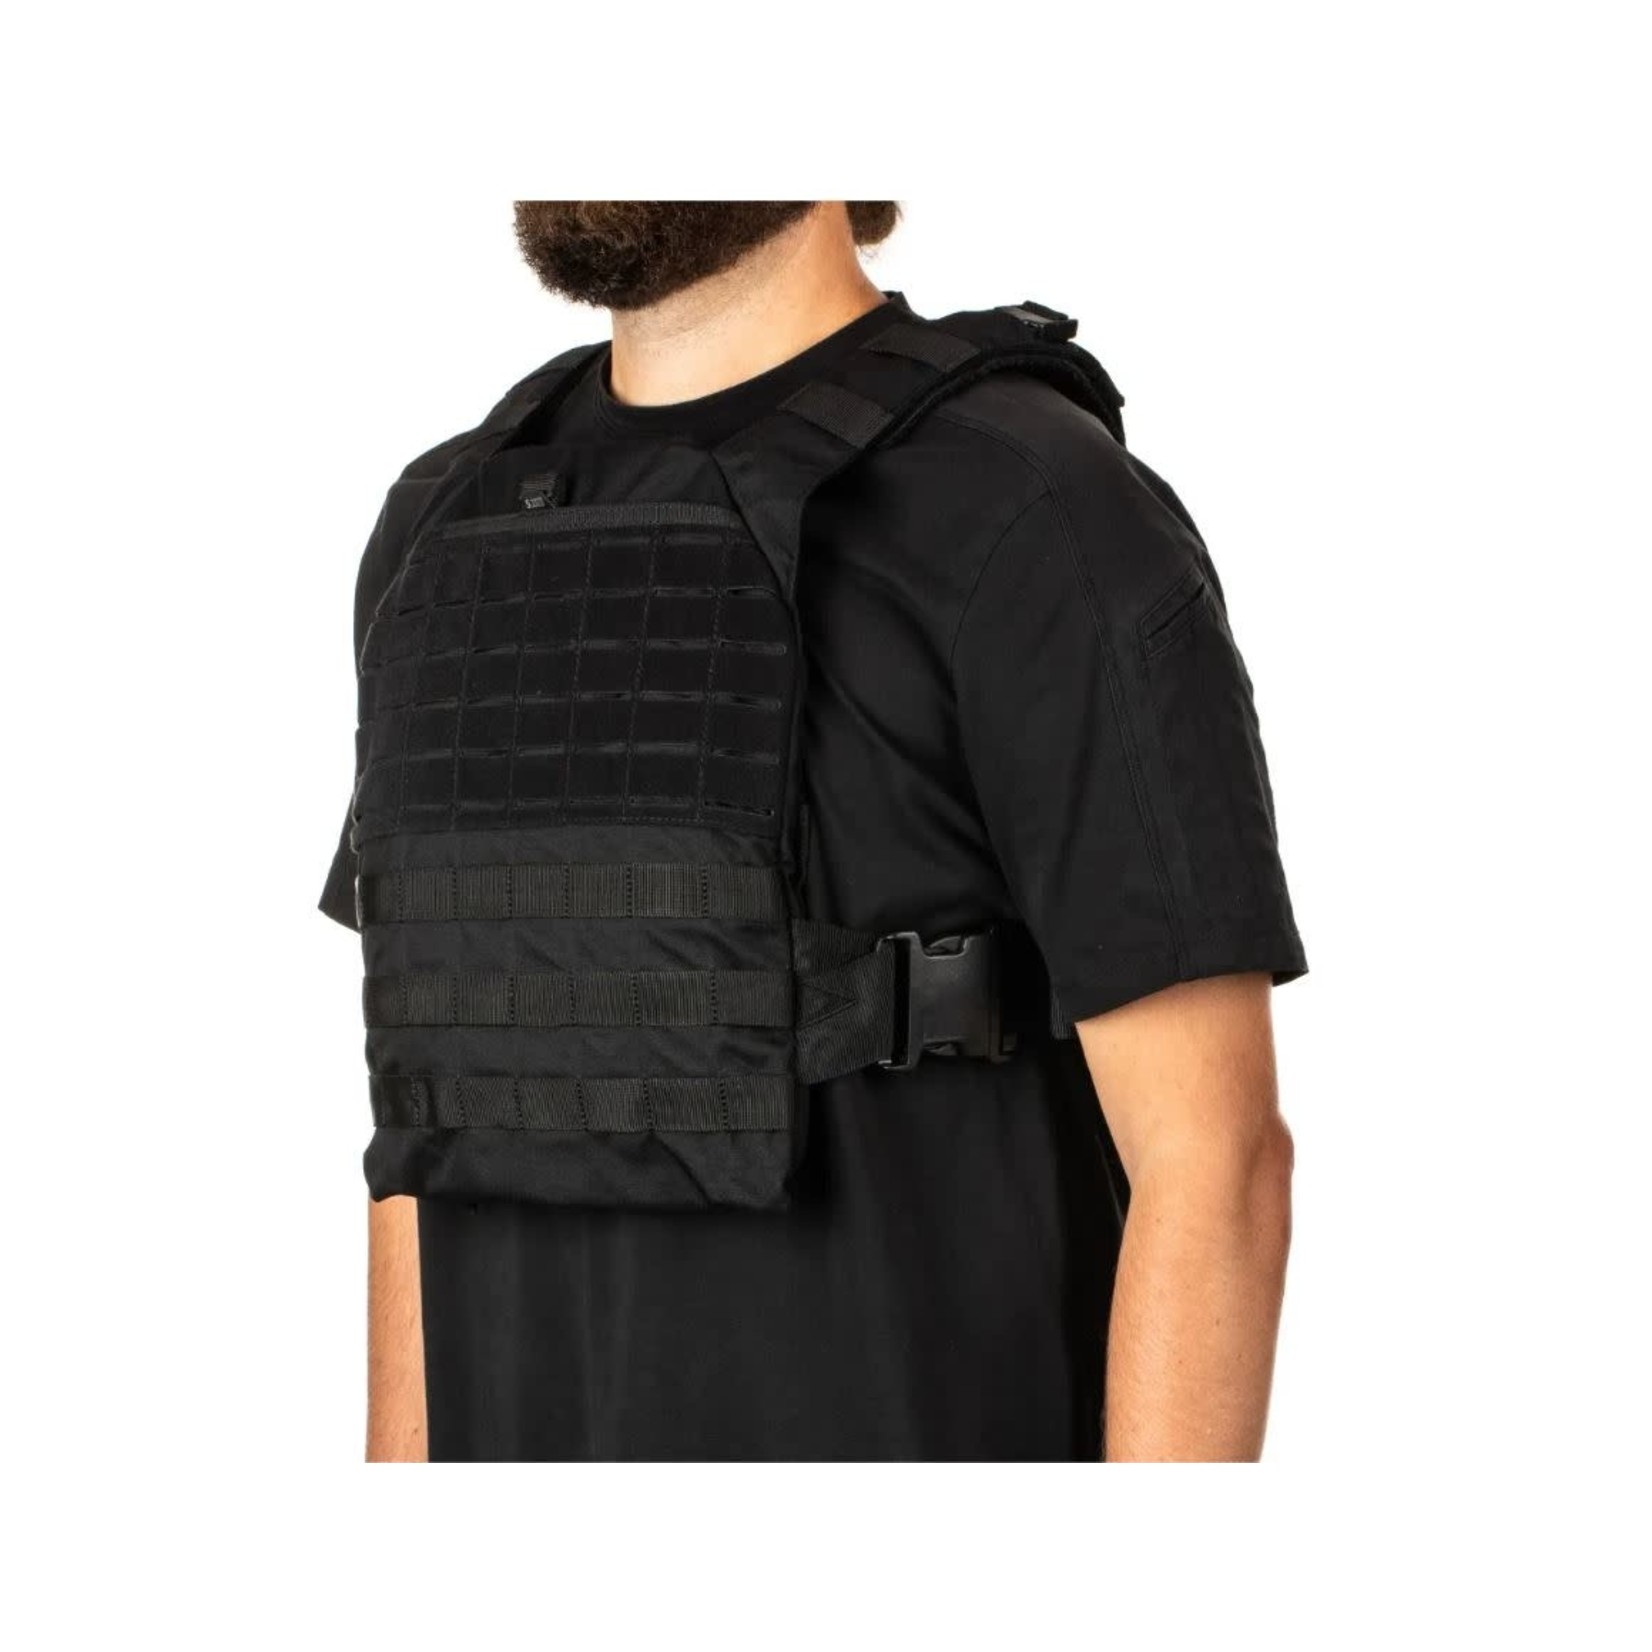 5.11 Tactical 5.11 ABR Plate Carrier